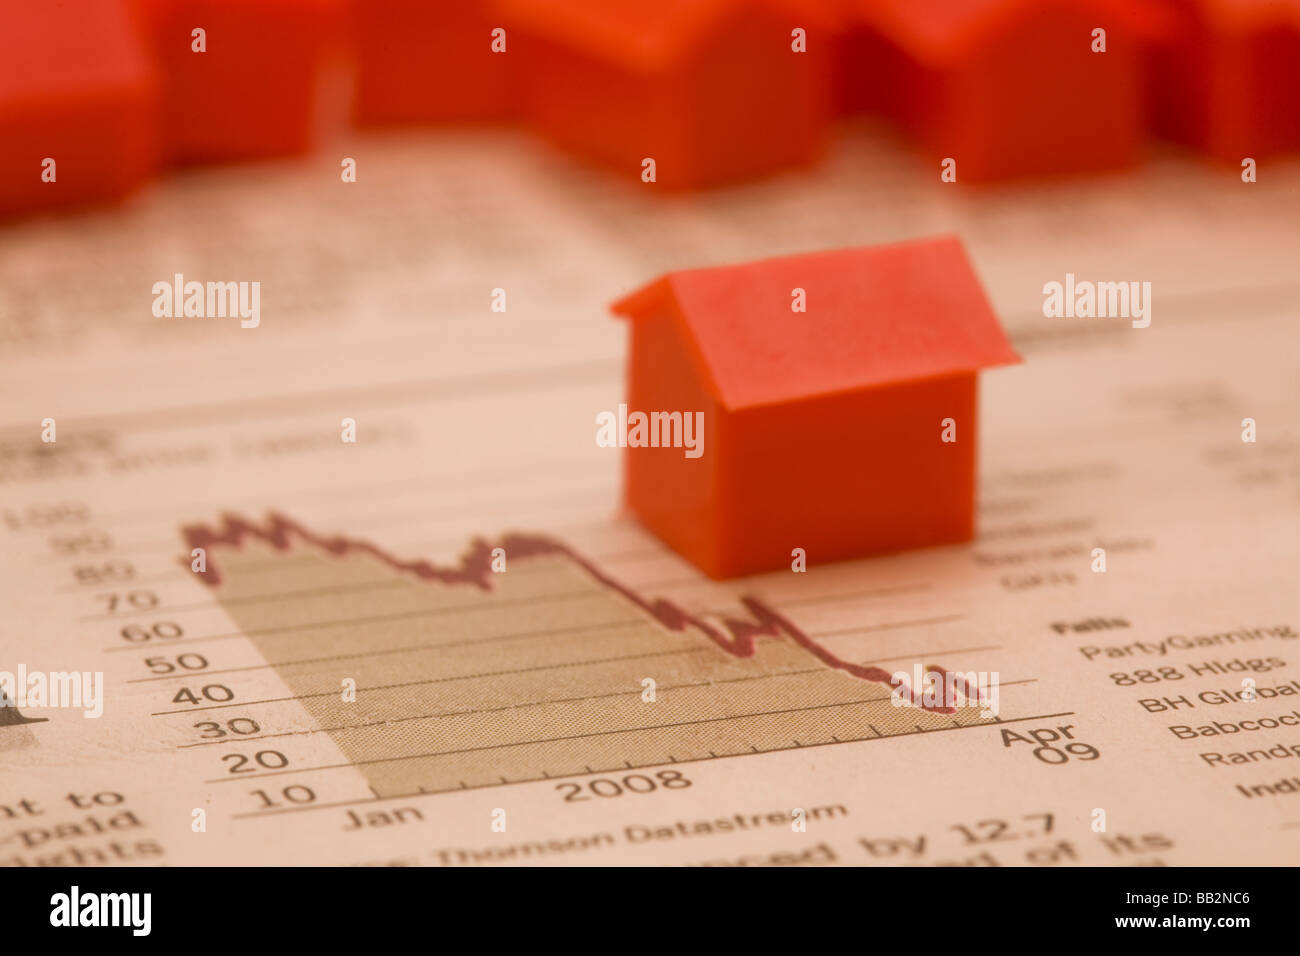 image of the FT with a downward graph and monopoly house depicting the fall in the UK housing market Stock Photo